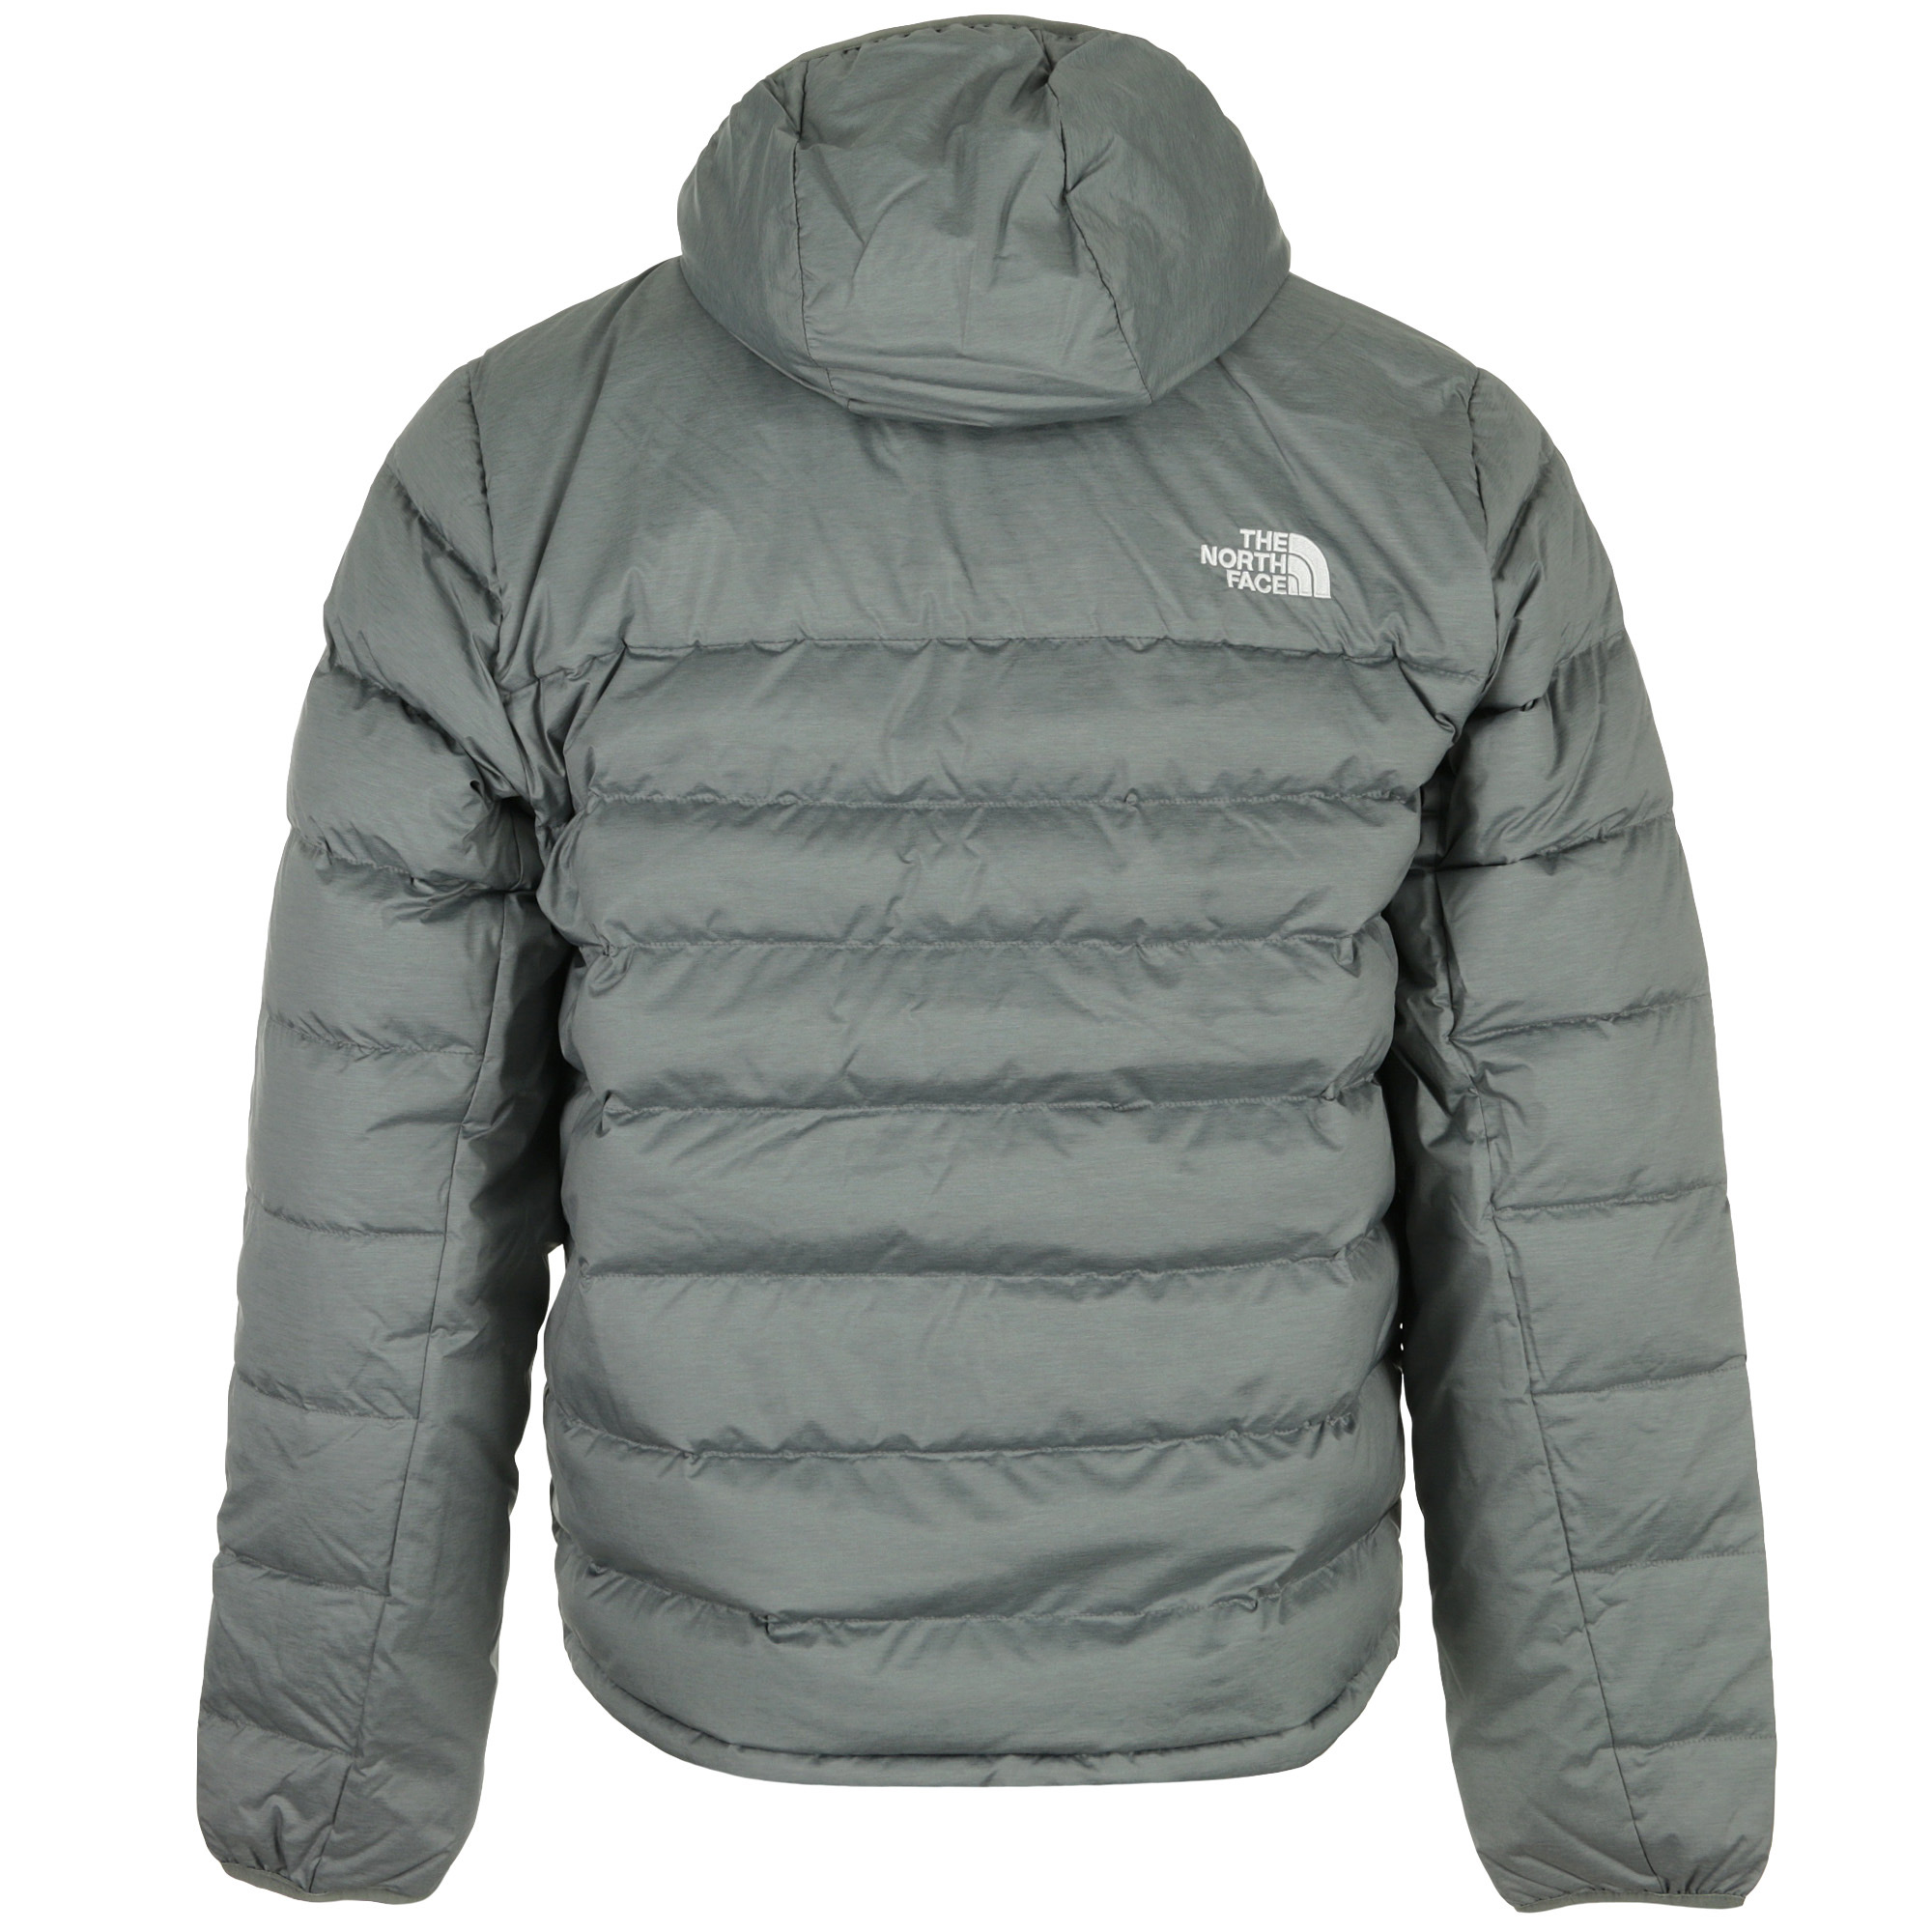 The North Face Aconcagua 2 Hoodie